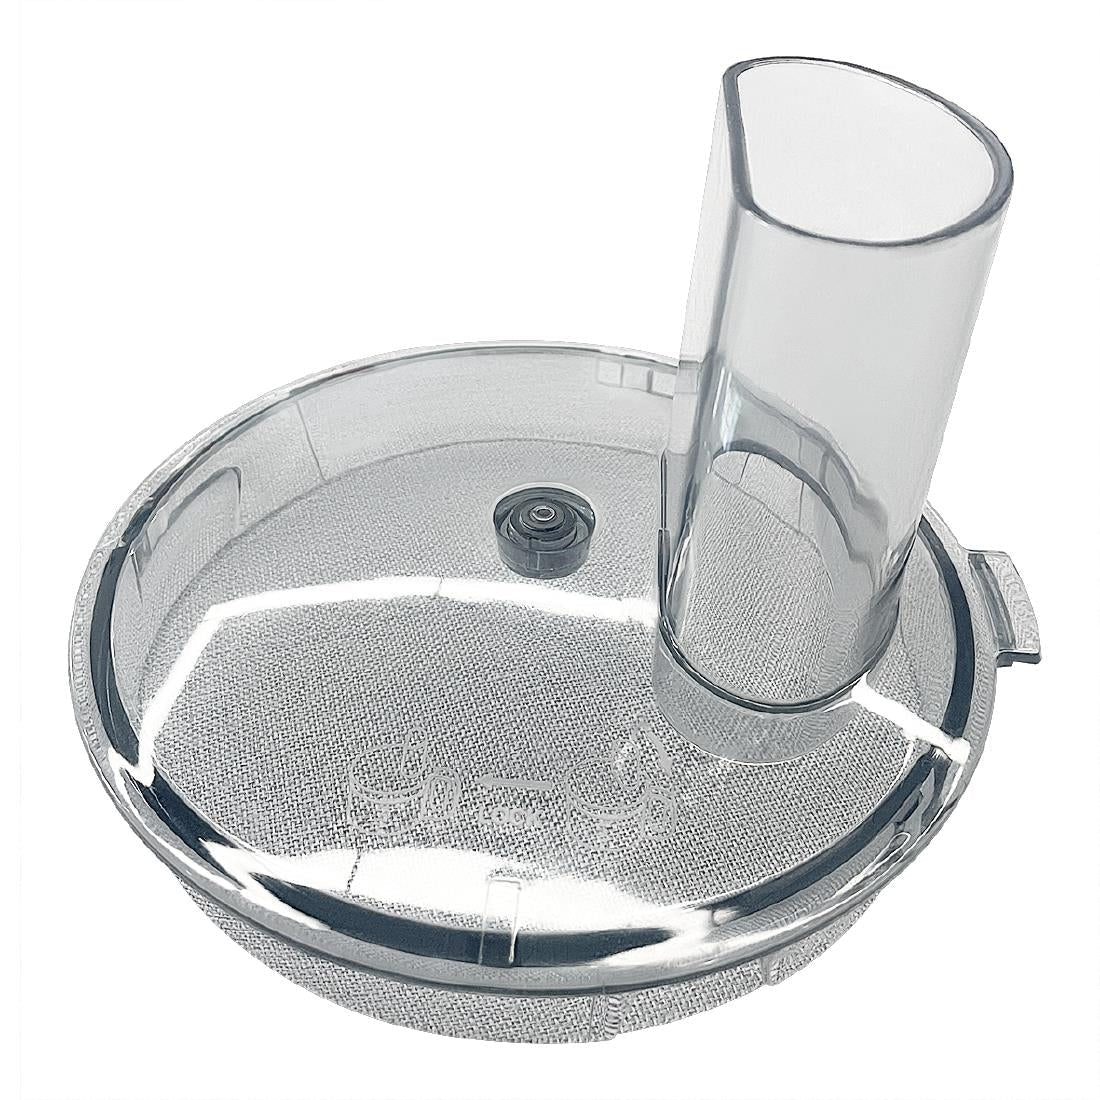 AM386 Caterlite Food Processor Lid with Feeding Chute JD Catering Equipment Solutions Ltd